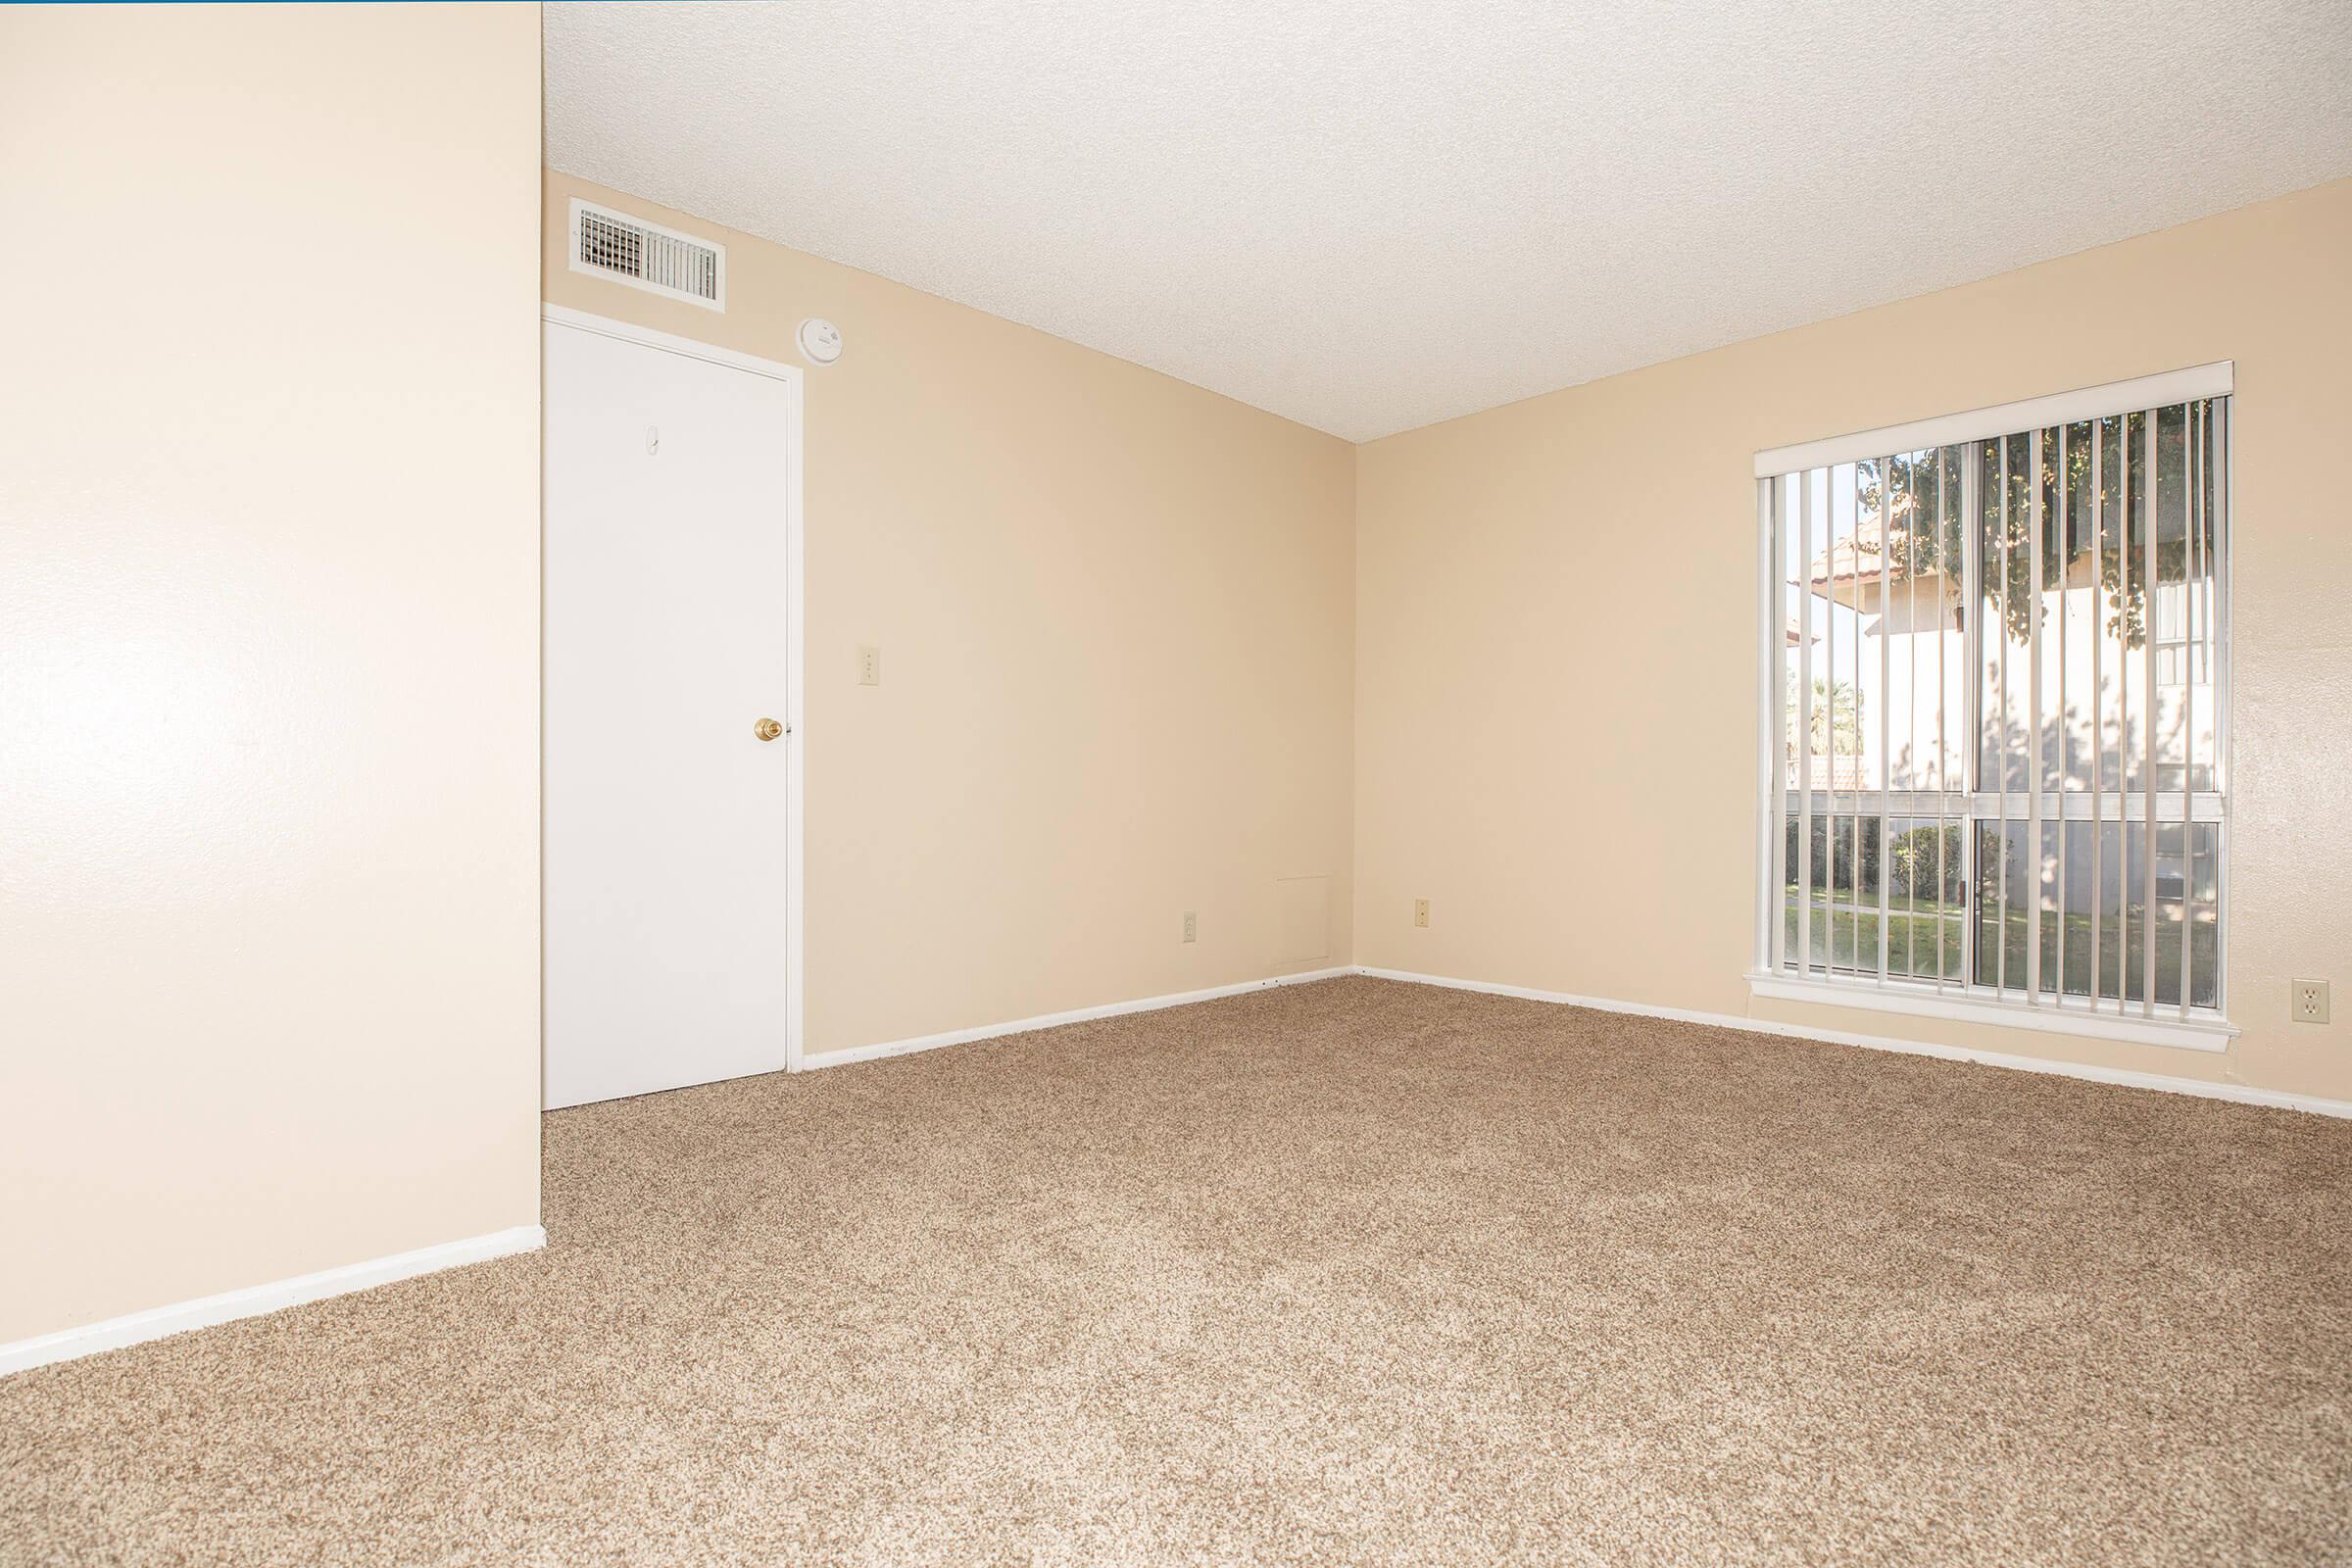 Vacant bedroom with open window blinds